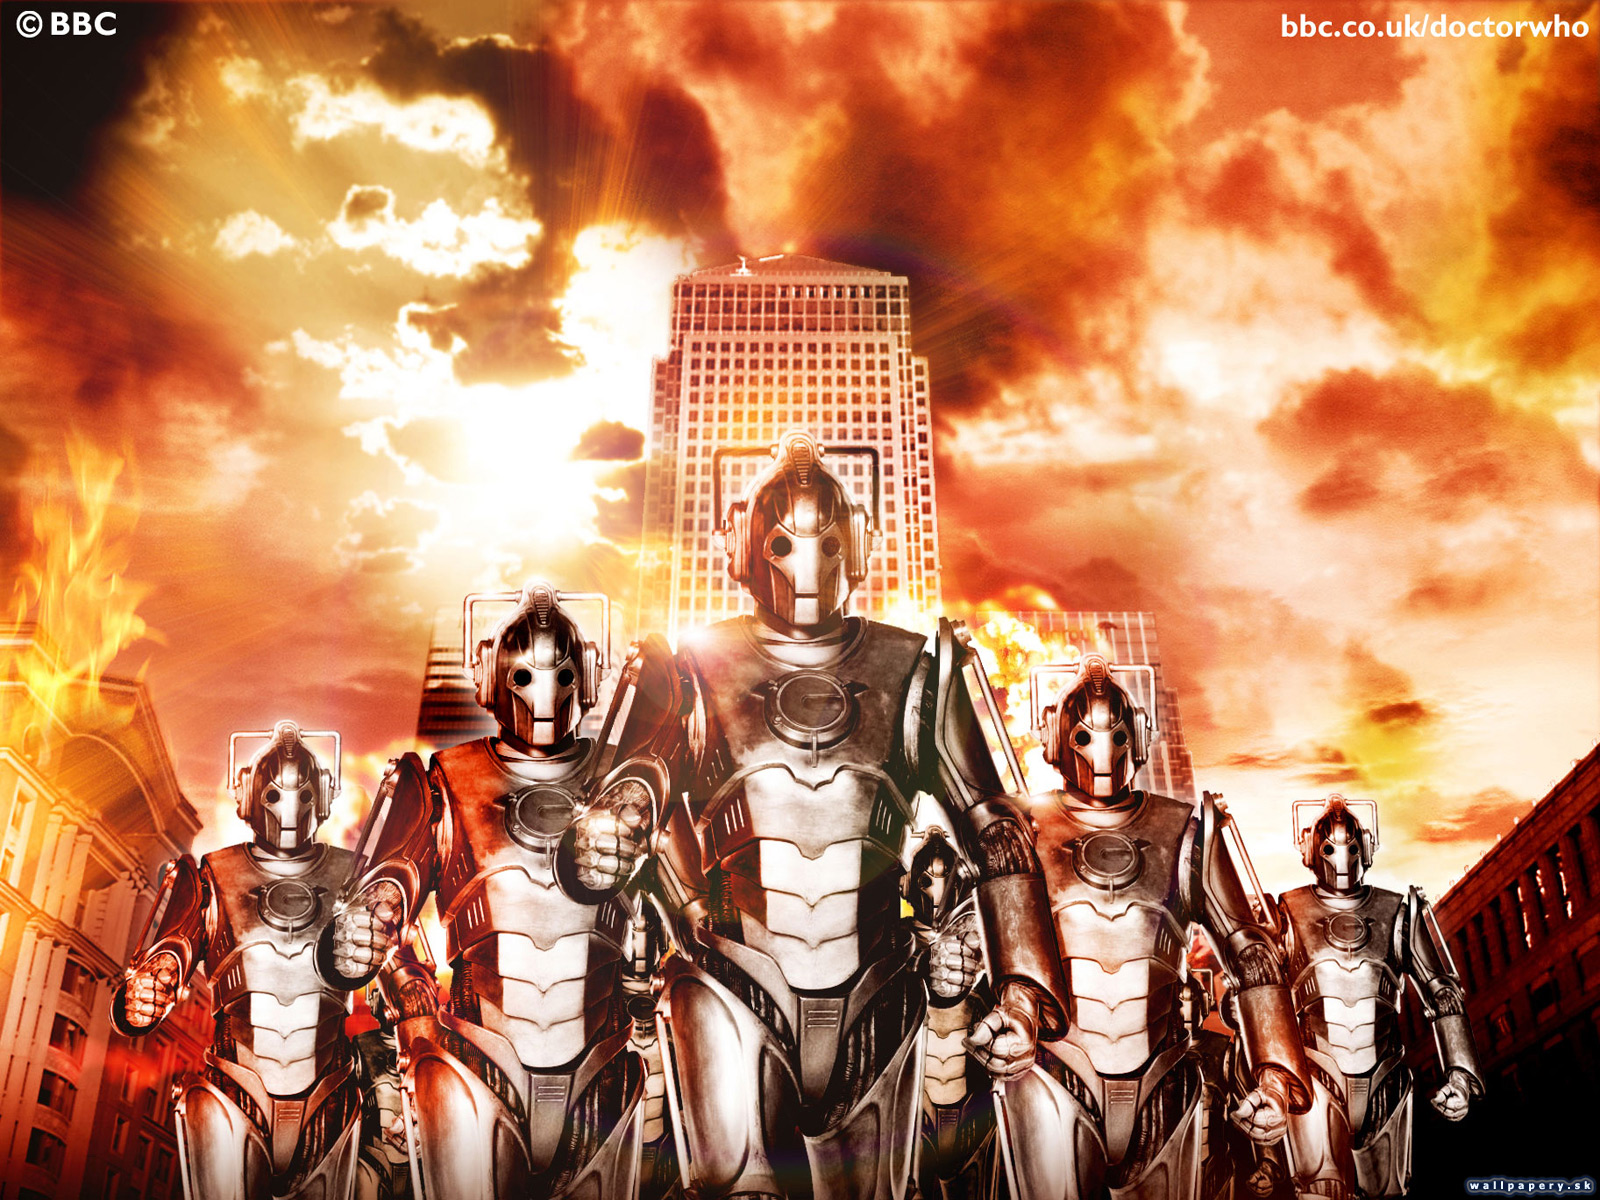 Doctor Who: The Adventure Games - Blood of the Cybermen - wallpaper 4